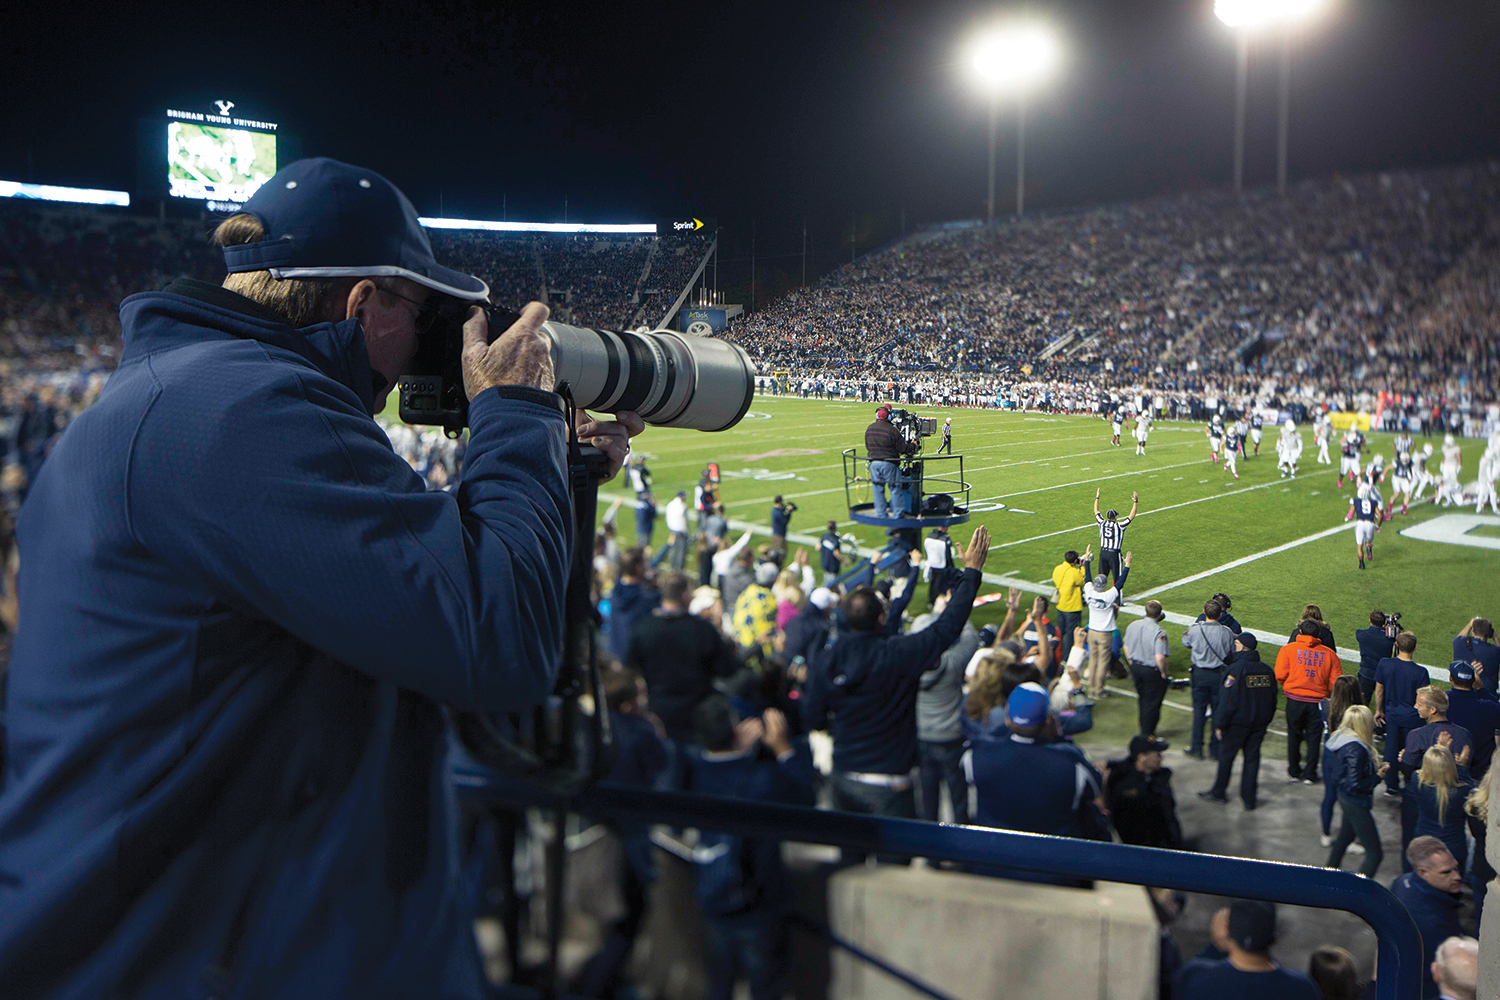 BYU photographer captures a touchdown on the field.